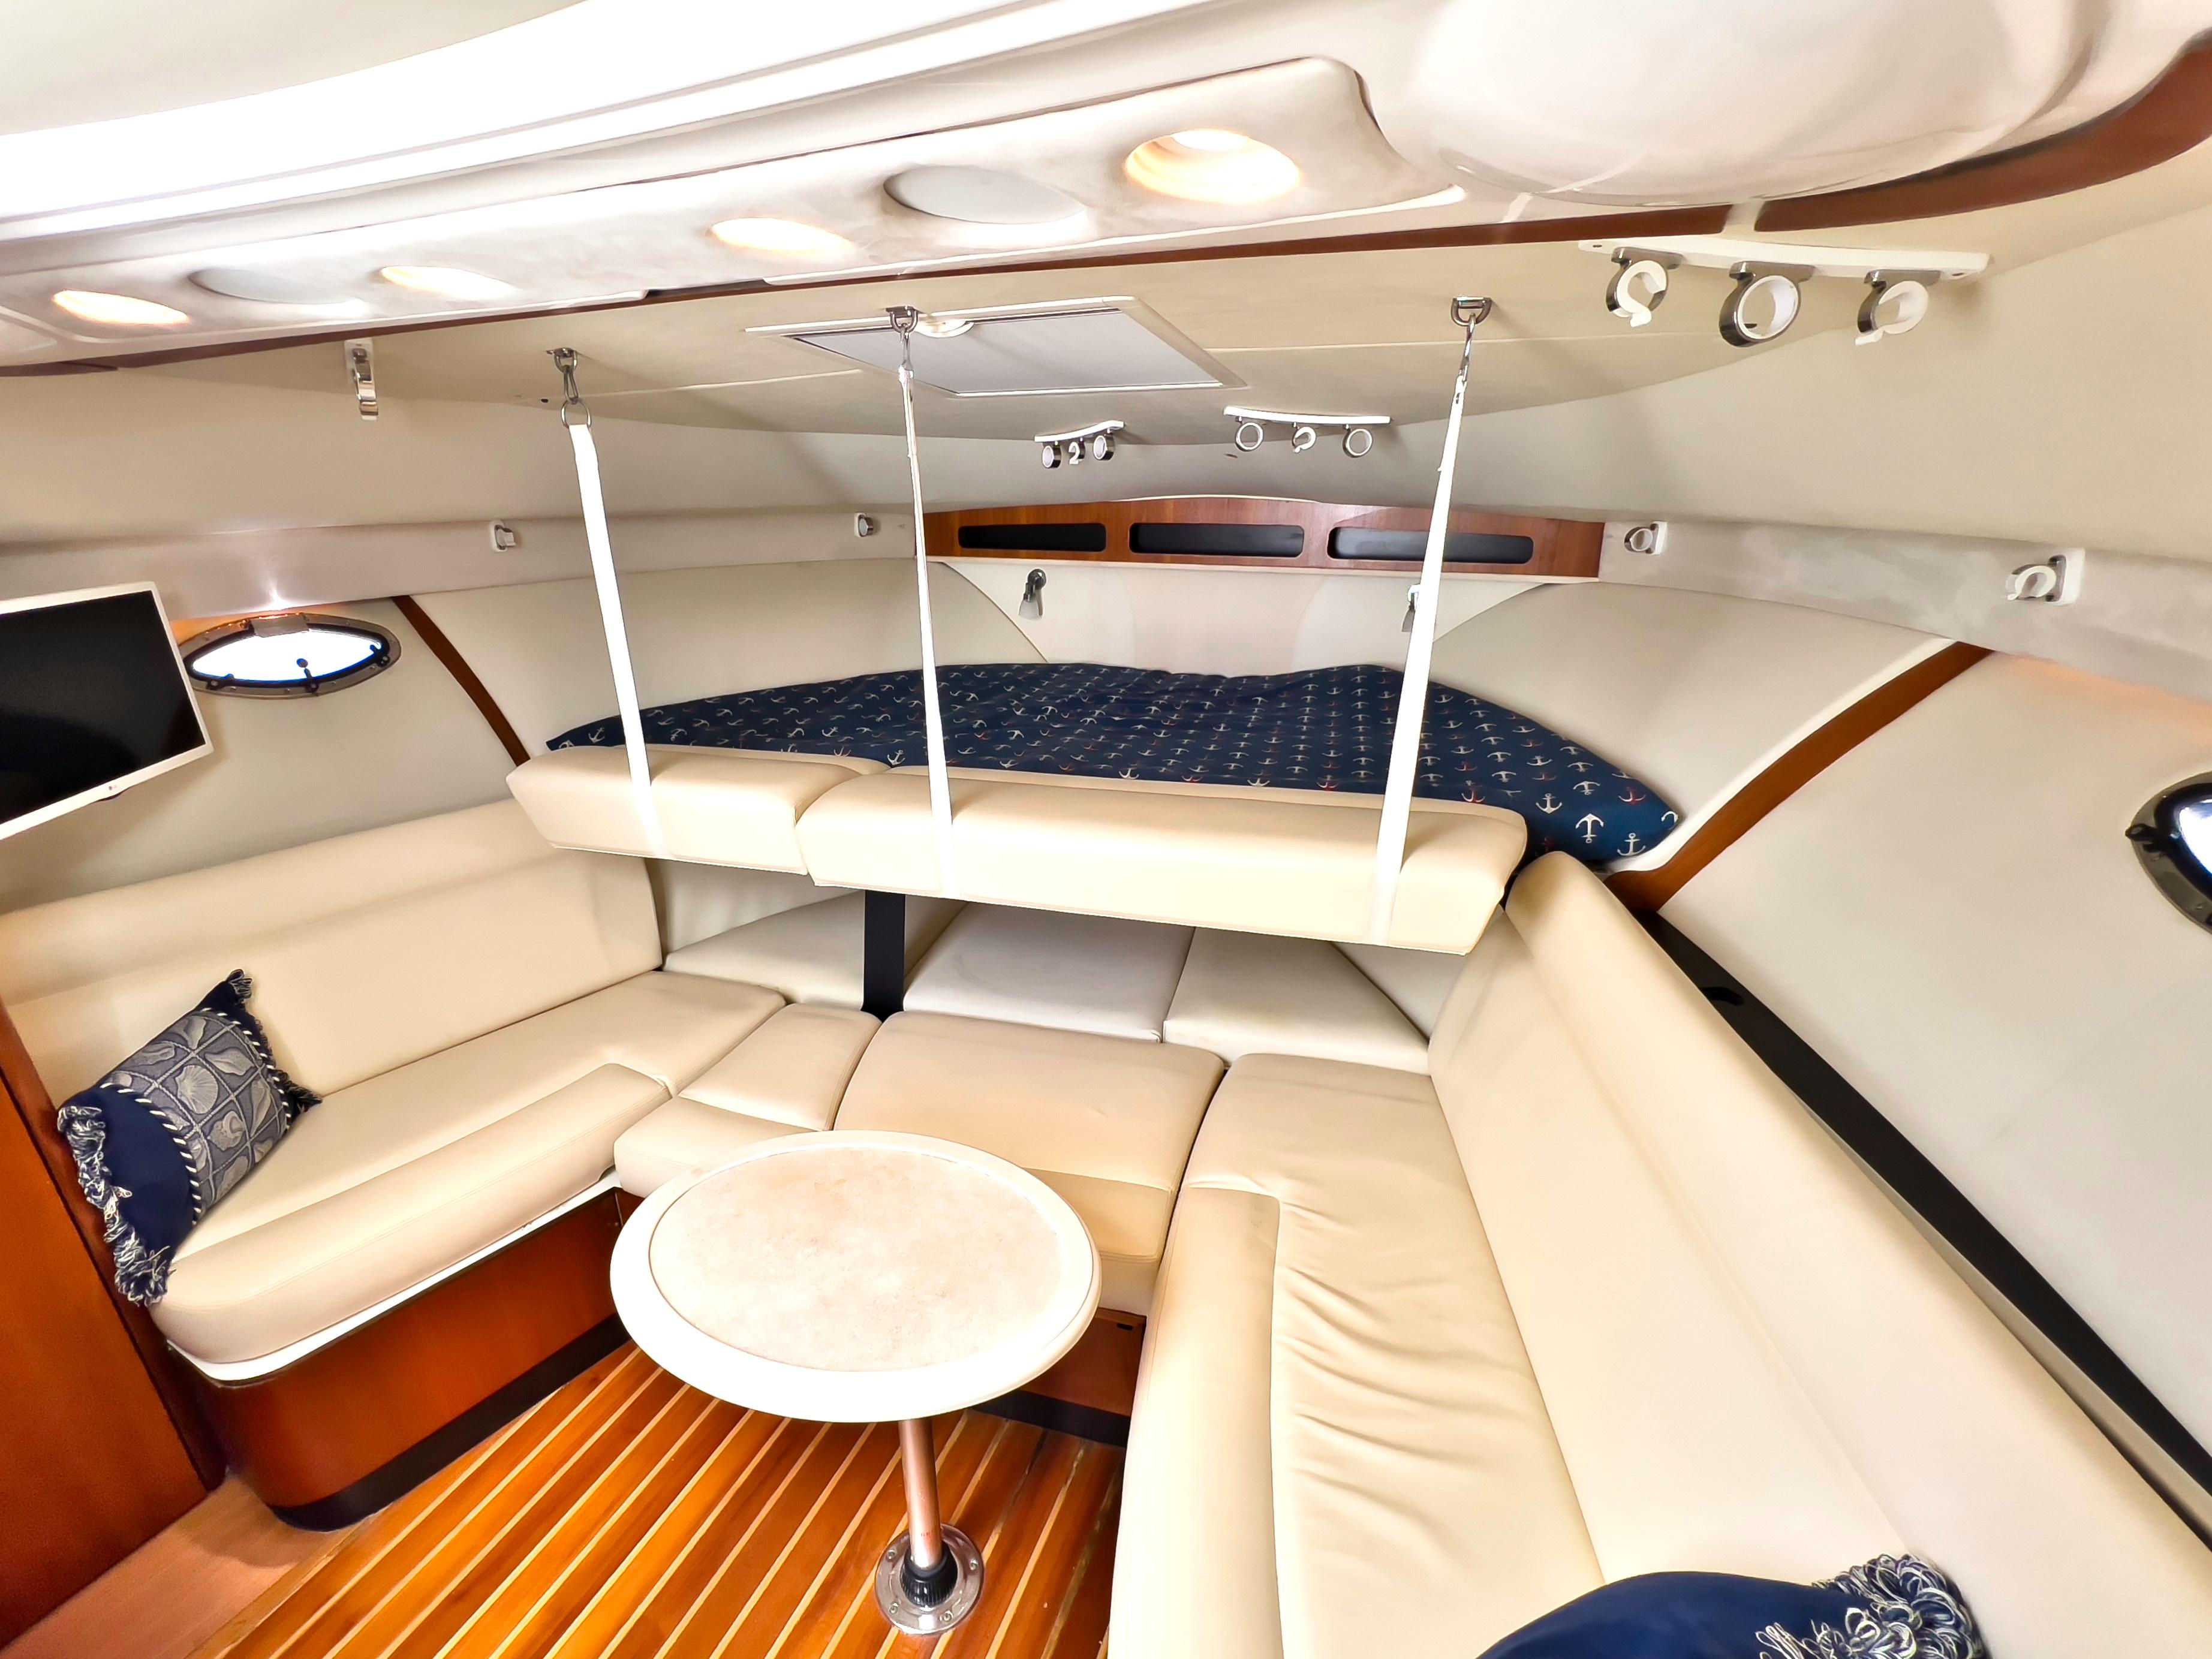 Tiara 30 Seafari - Interior Cabin, Seating with Backrests Folded Upward to Extend Berth, Table and